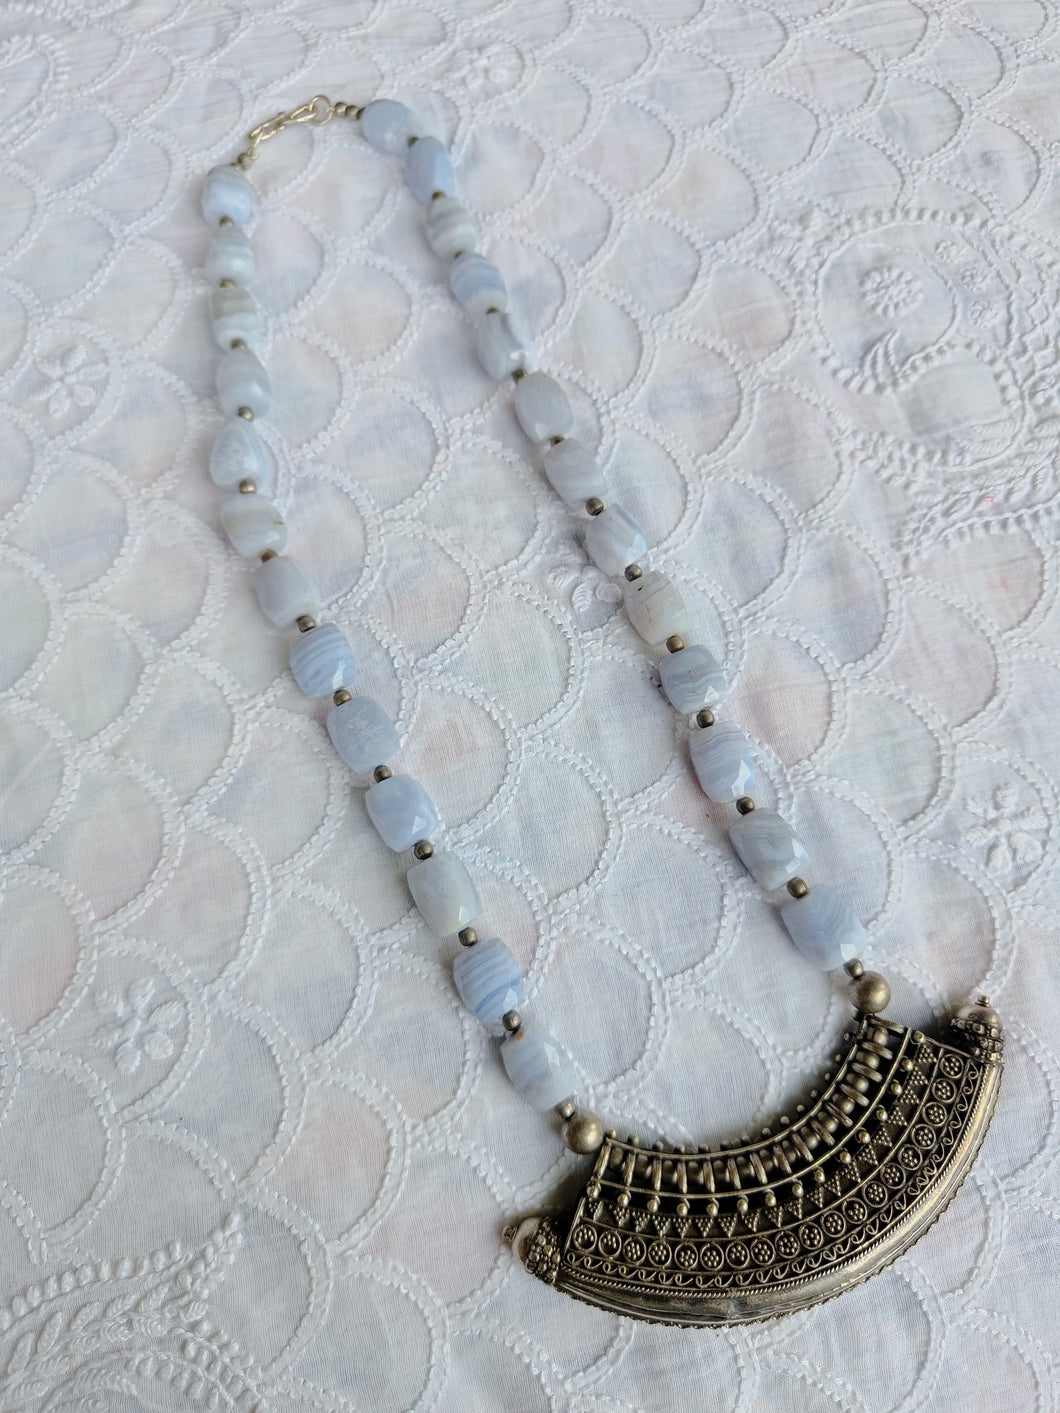 Blue Lace Agate Necklace Wrap Peyote Seed Beaded Aragonite Blue Necklace  Stone Basque American Necklace Boho Hippie Gift Jewelry for Women - Etsy